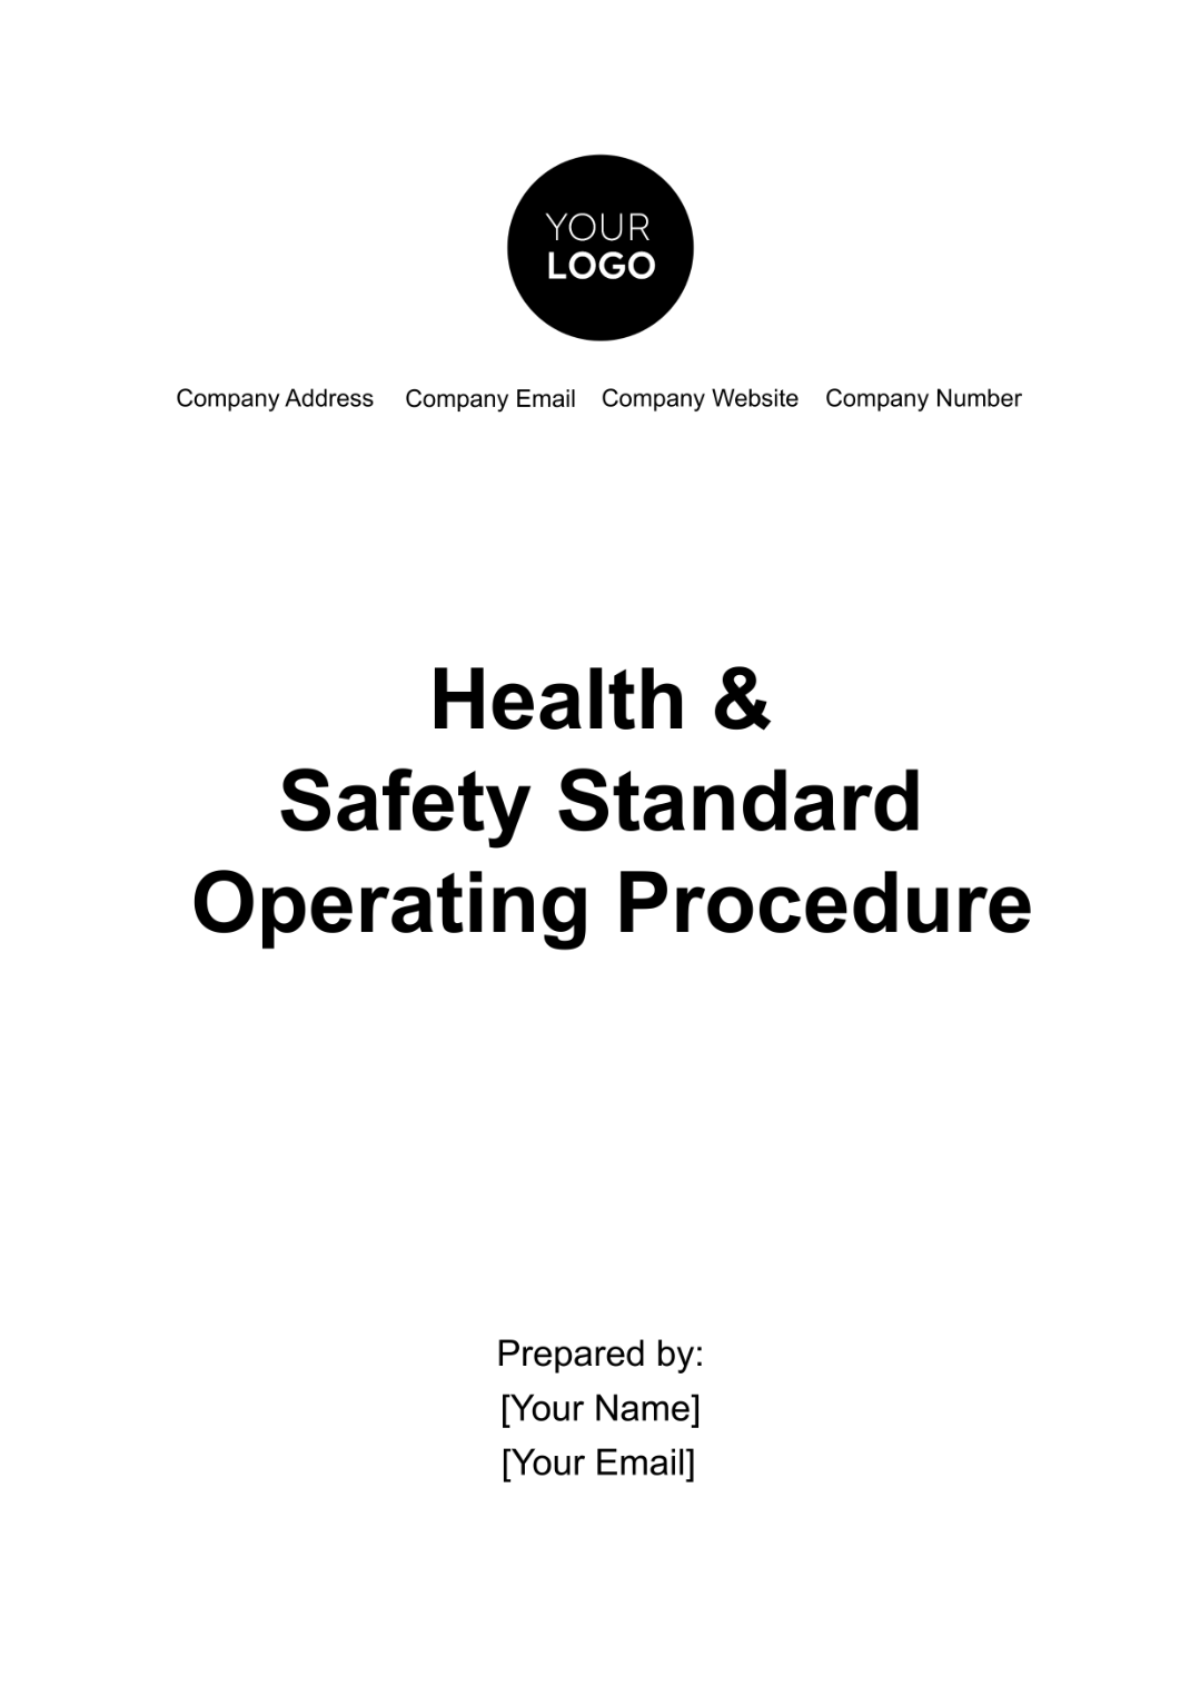 Free Health & Safety Standard Operating Procedure Template